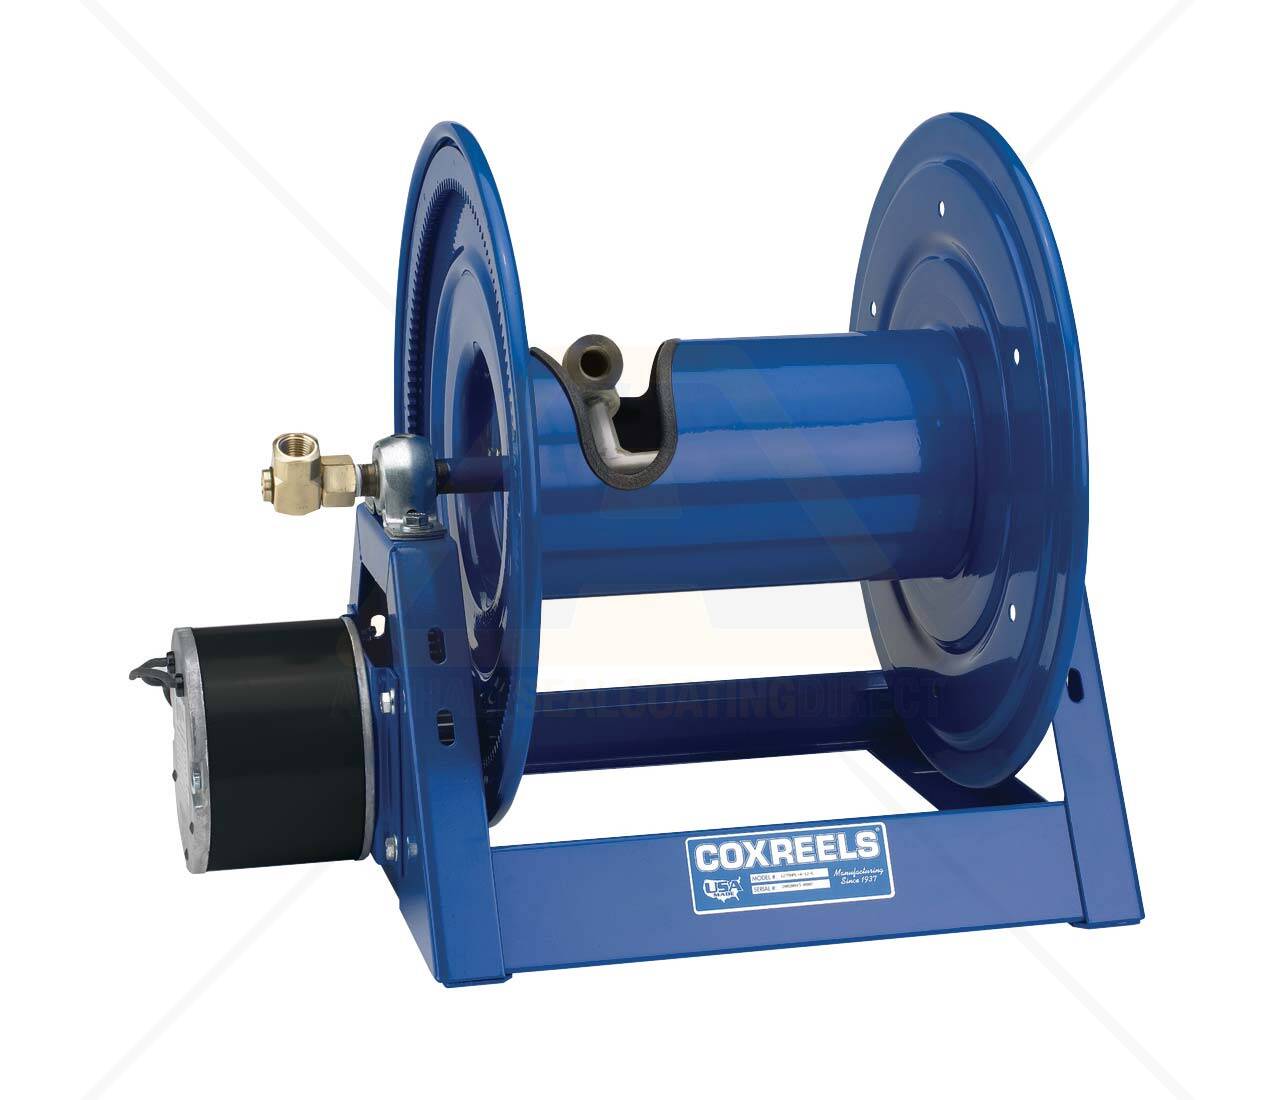 Hose Reel Cover, Xhl14006 - China Cover and Hose Reel Cover price